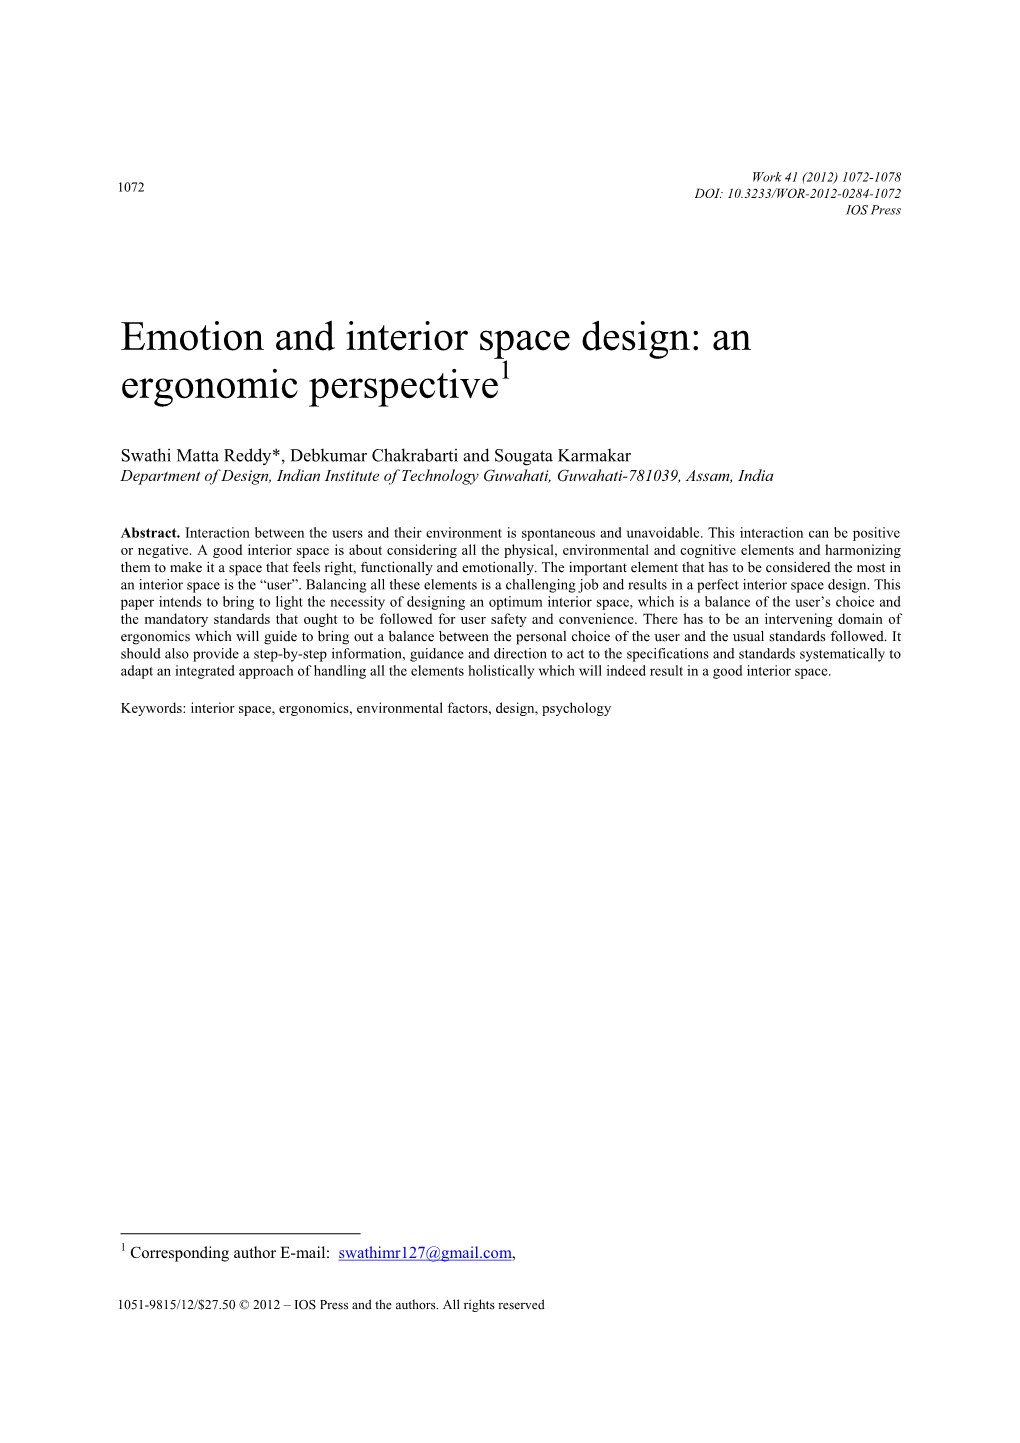 Emotion and Interior Space Design: an Ergonomic Perspective1